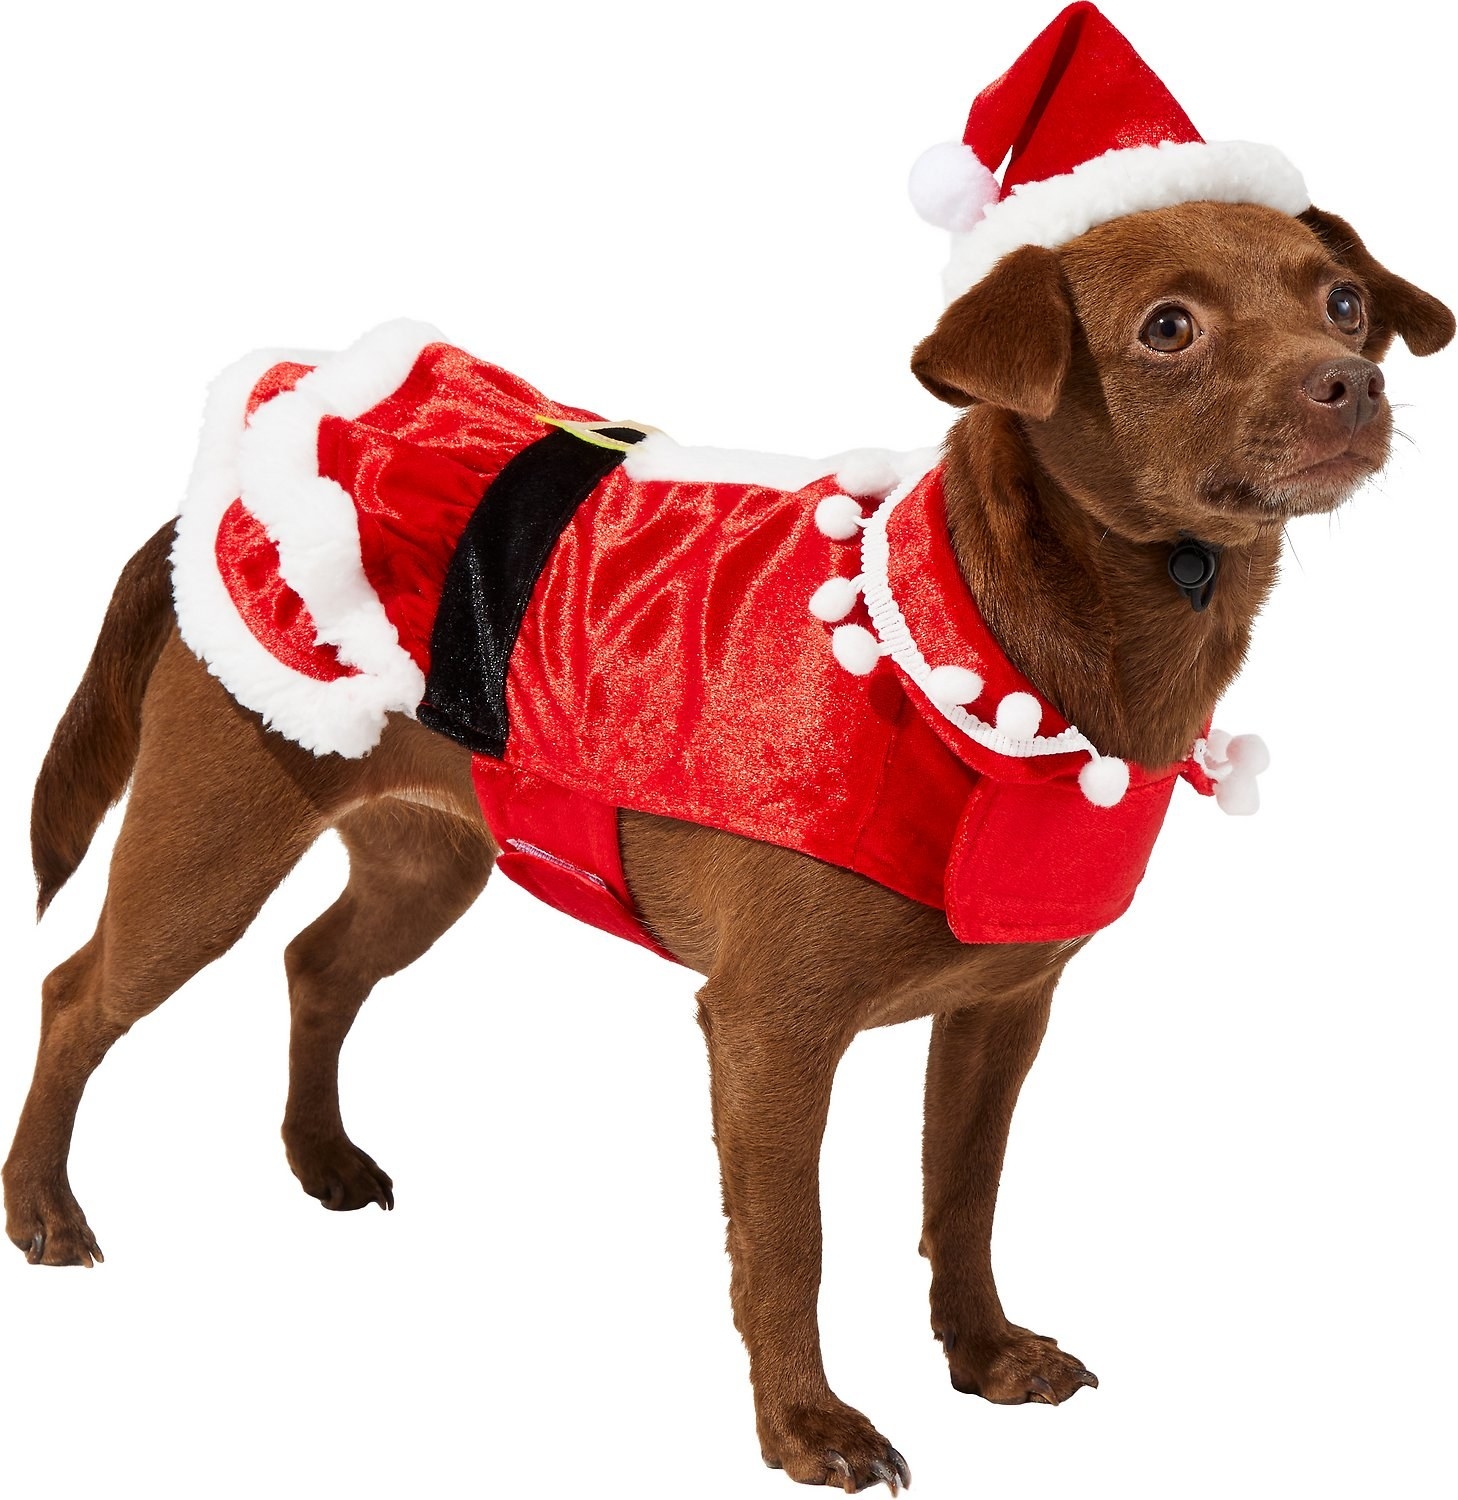 A dog in a Mrs. Claus costume.